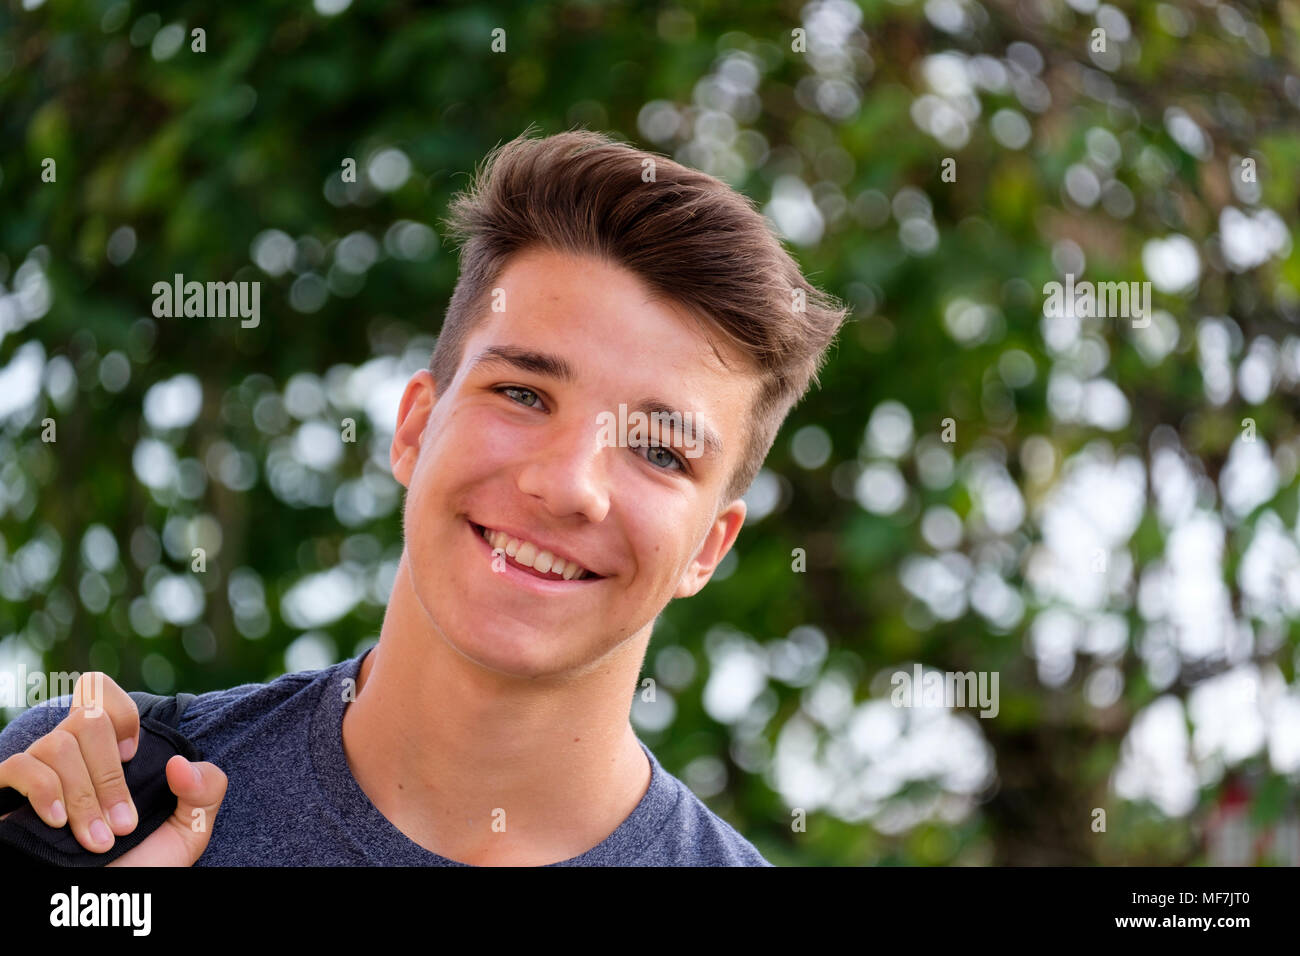 Portrait of smiling young man outdoors Stock Photo